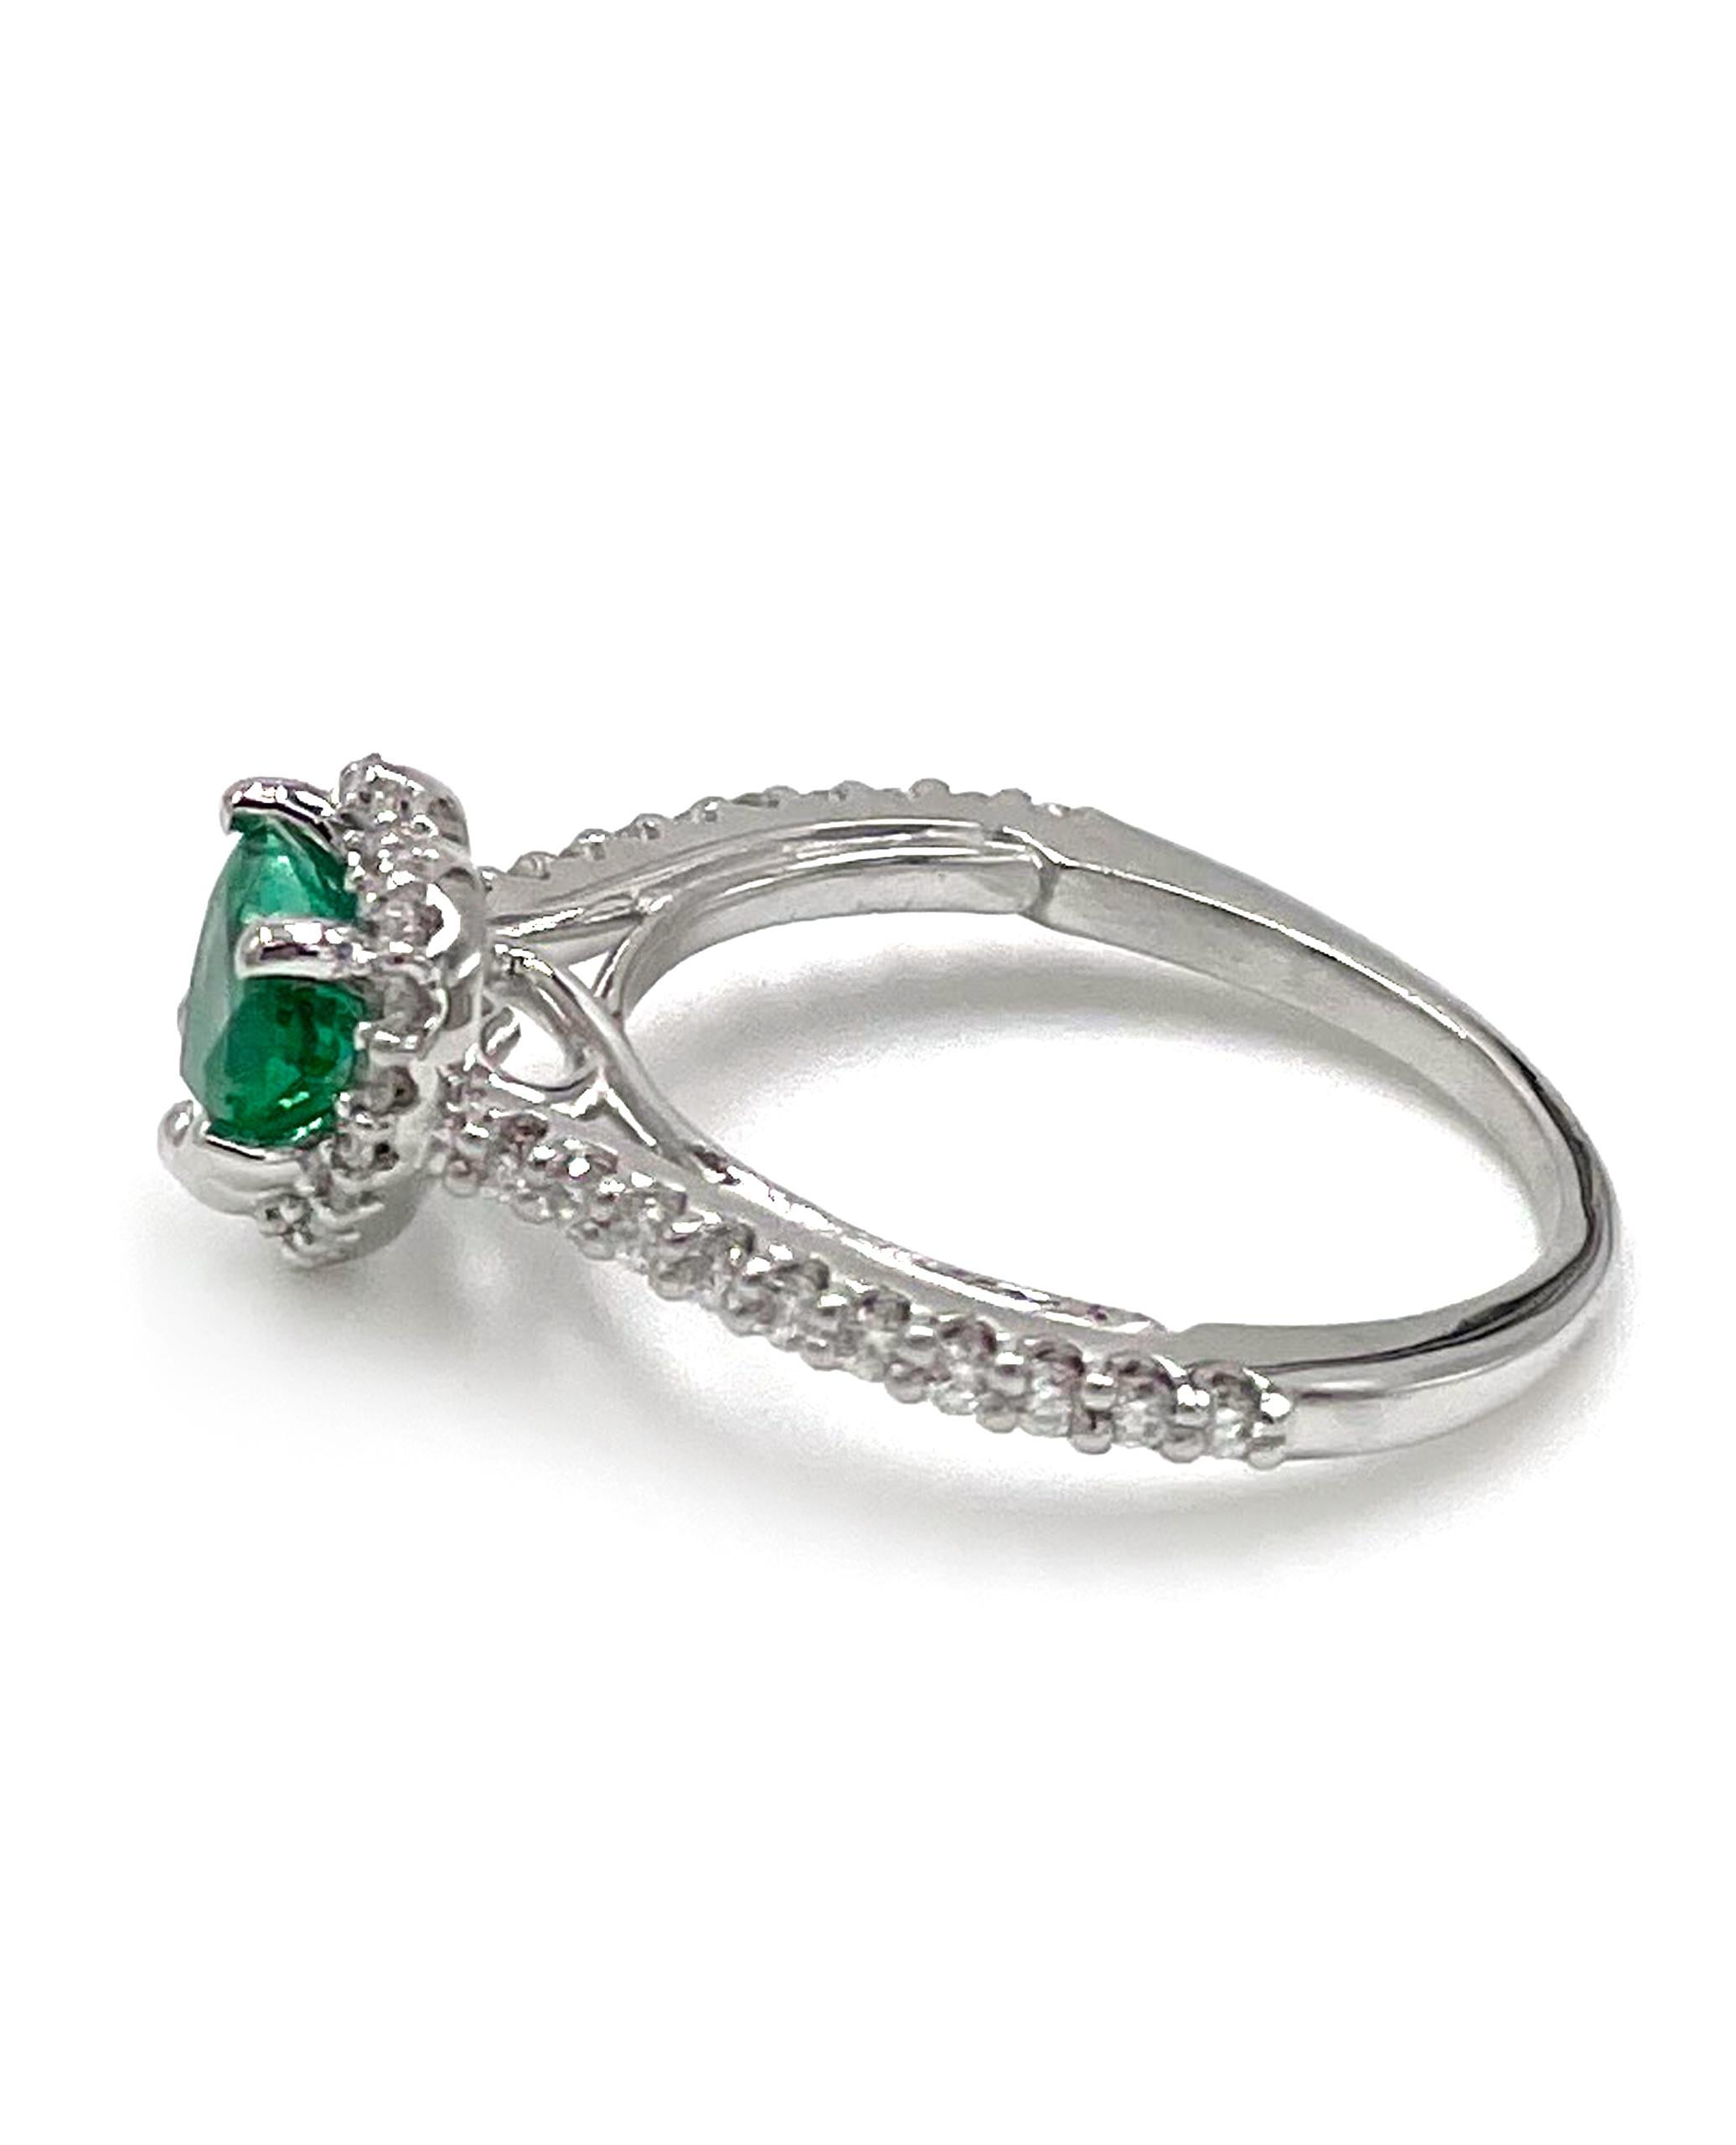 Contemporary 14K White Gold Heart Halo Diamond Ring with Heart Shape Emerald For Sale